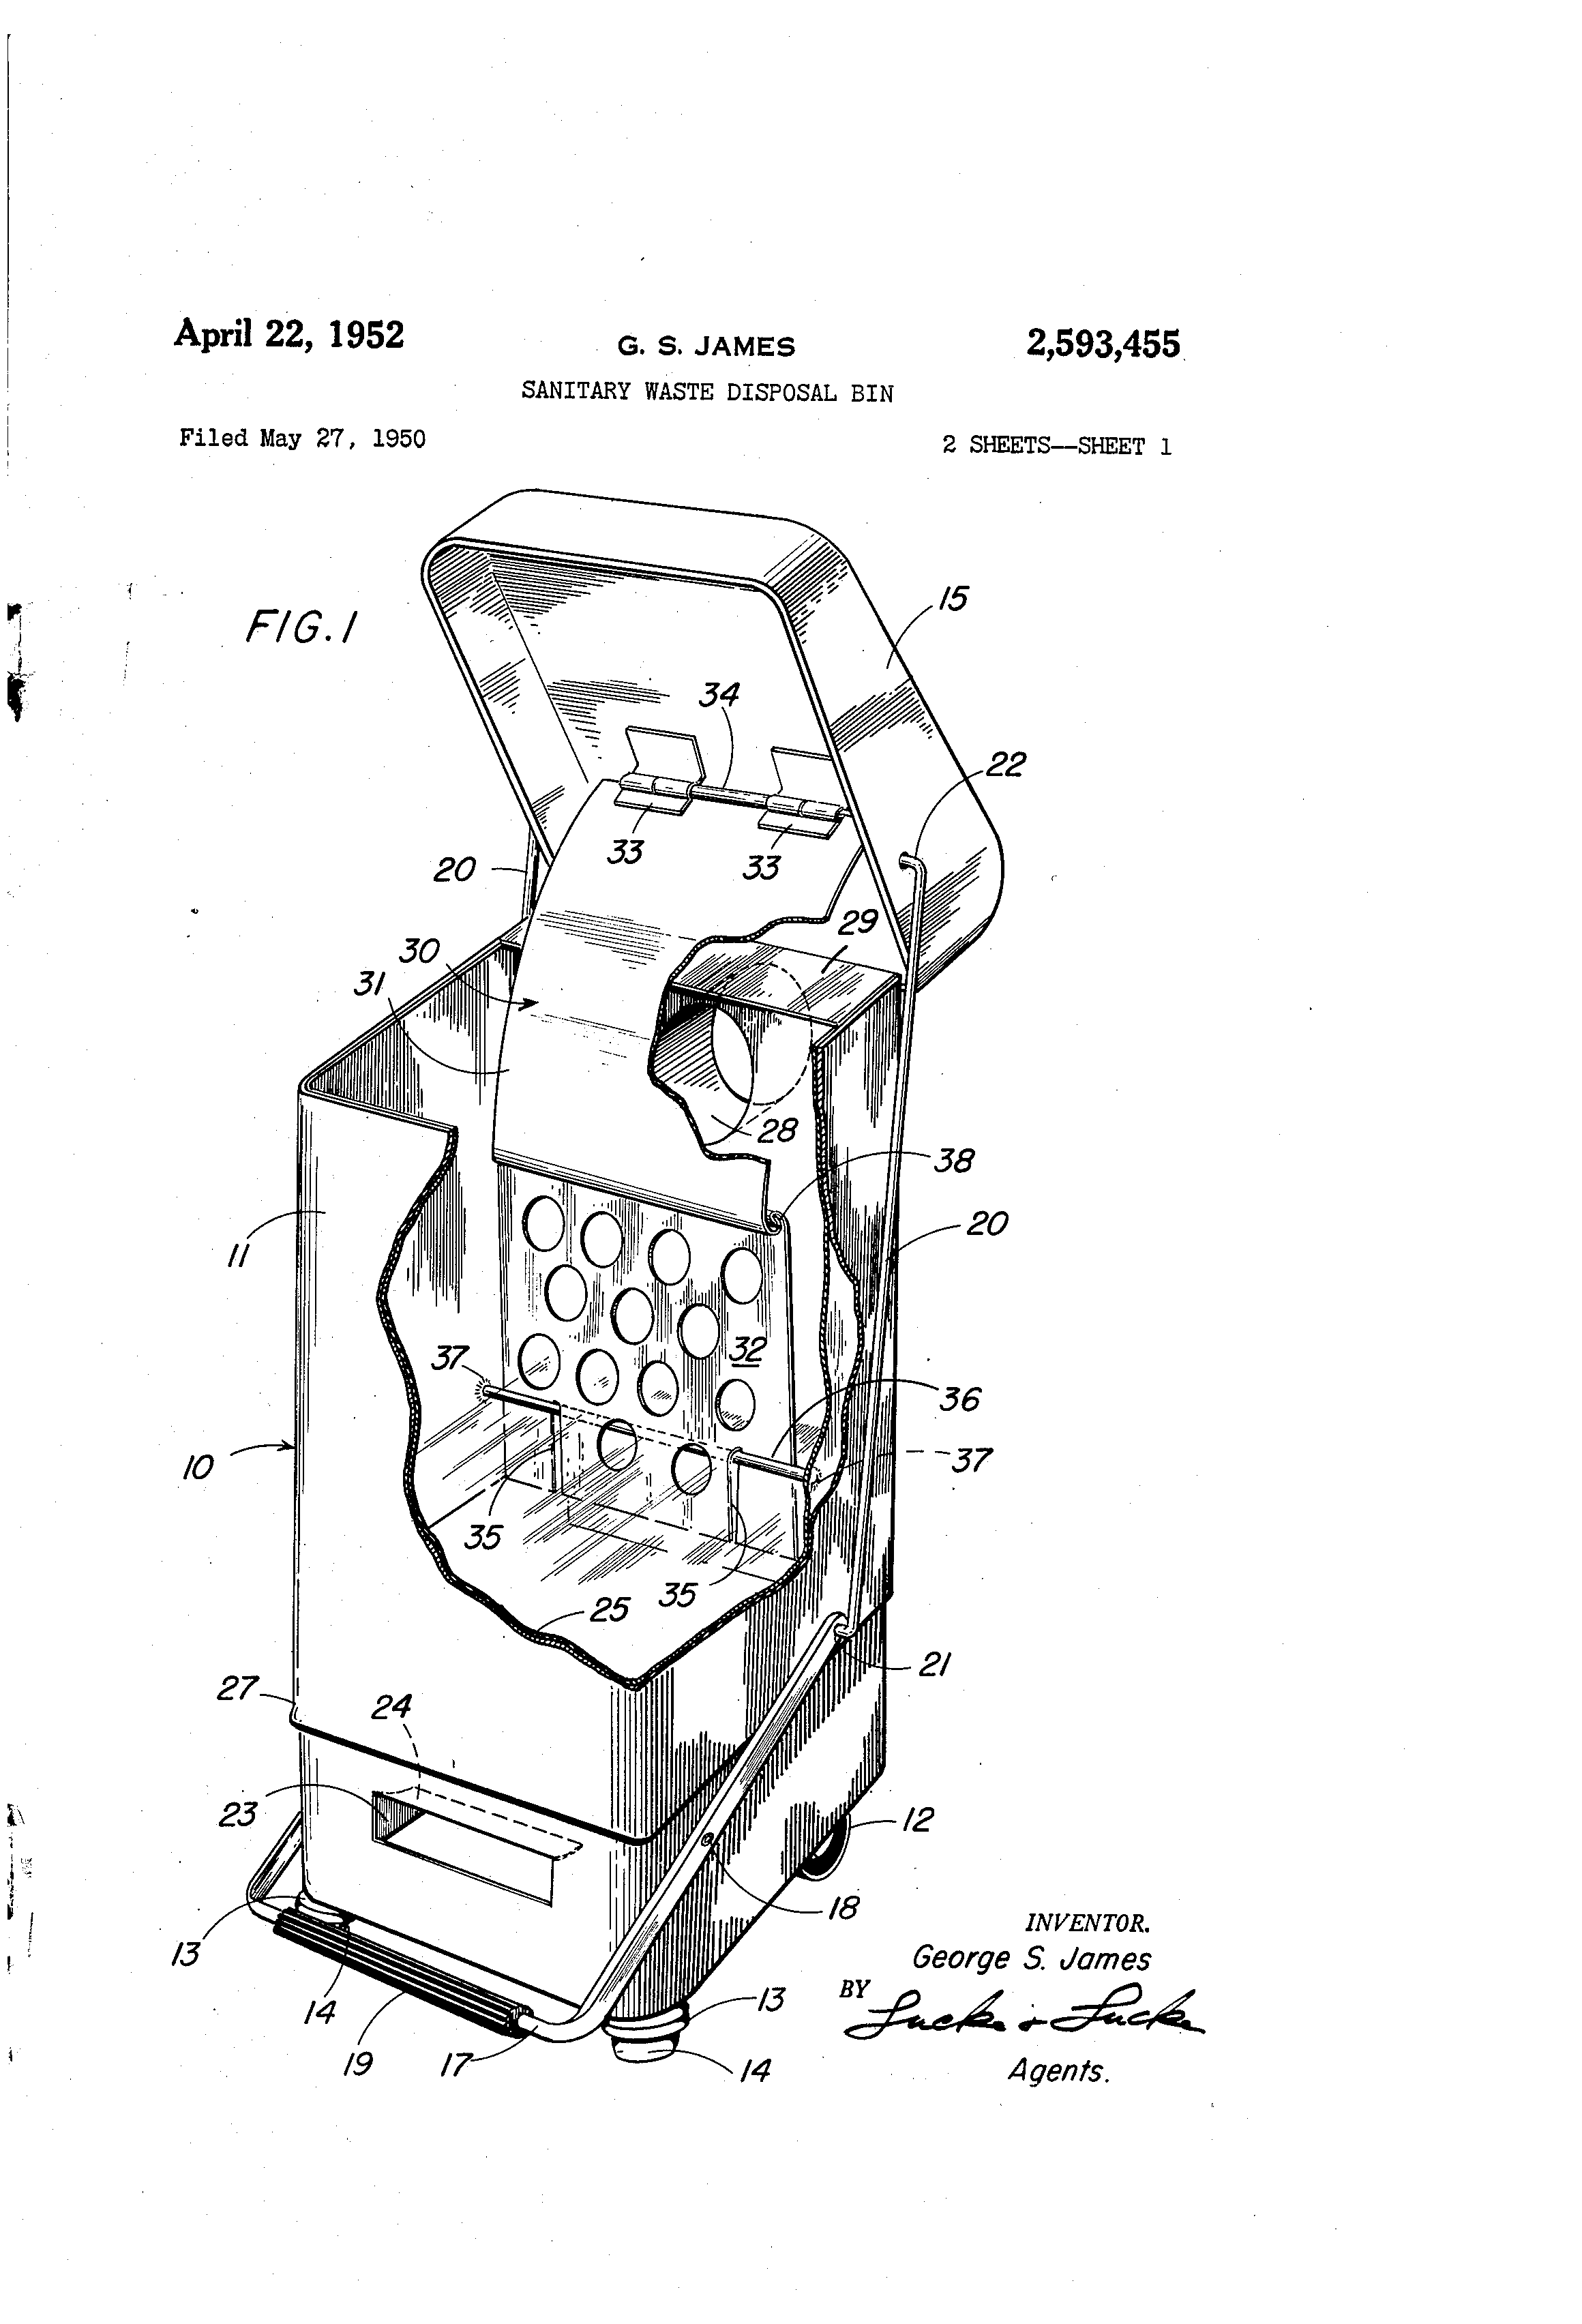 Sanitary waste disposal bin. US 2593455 A. Images. Patent Drawing